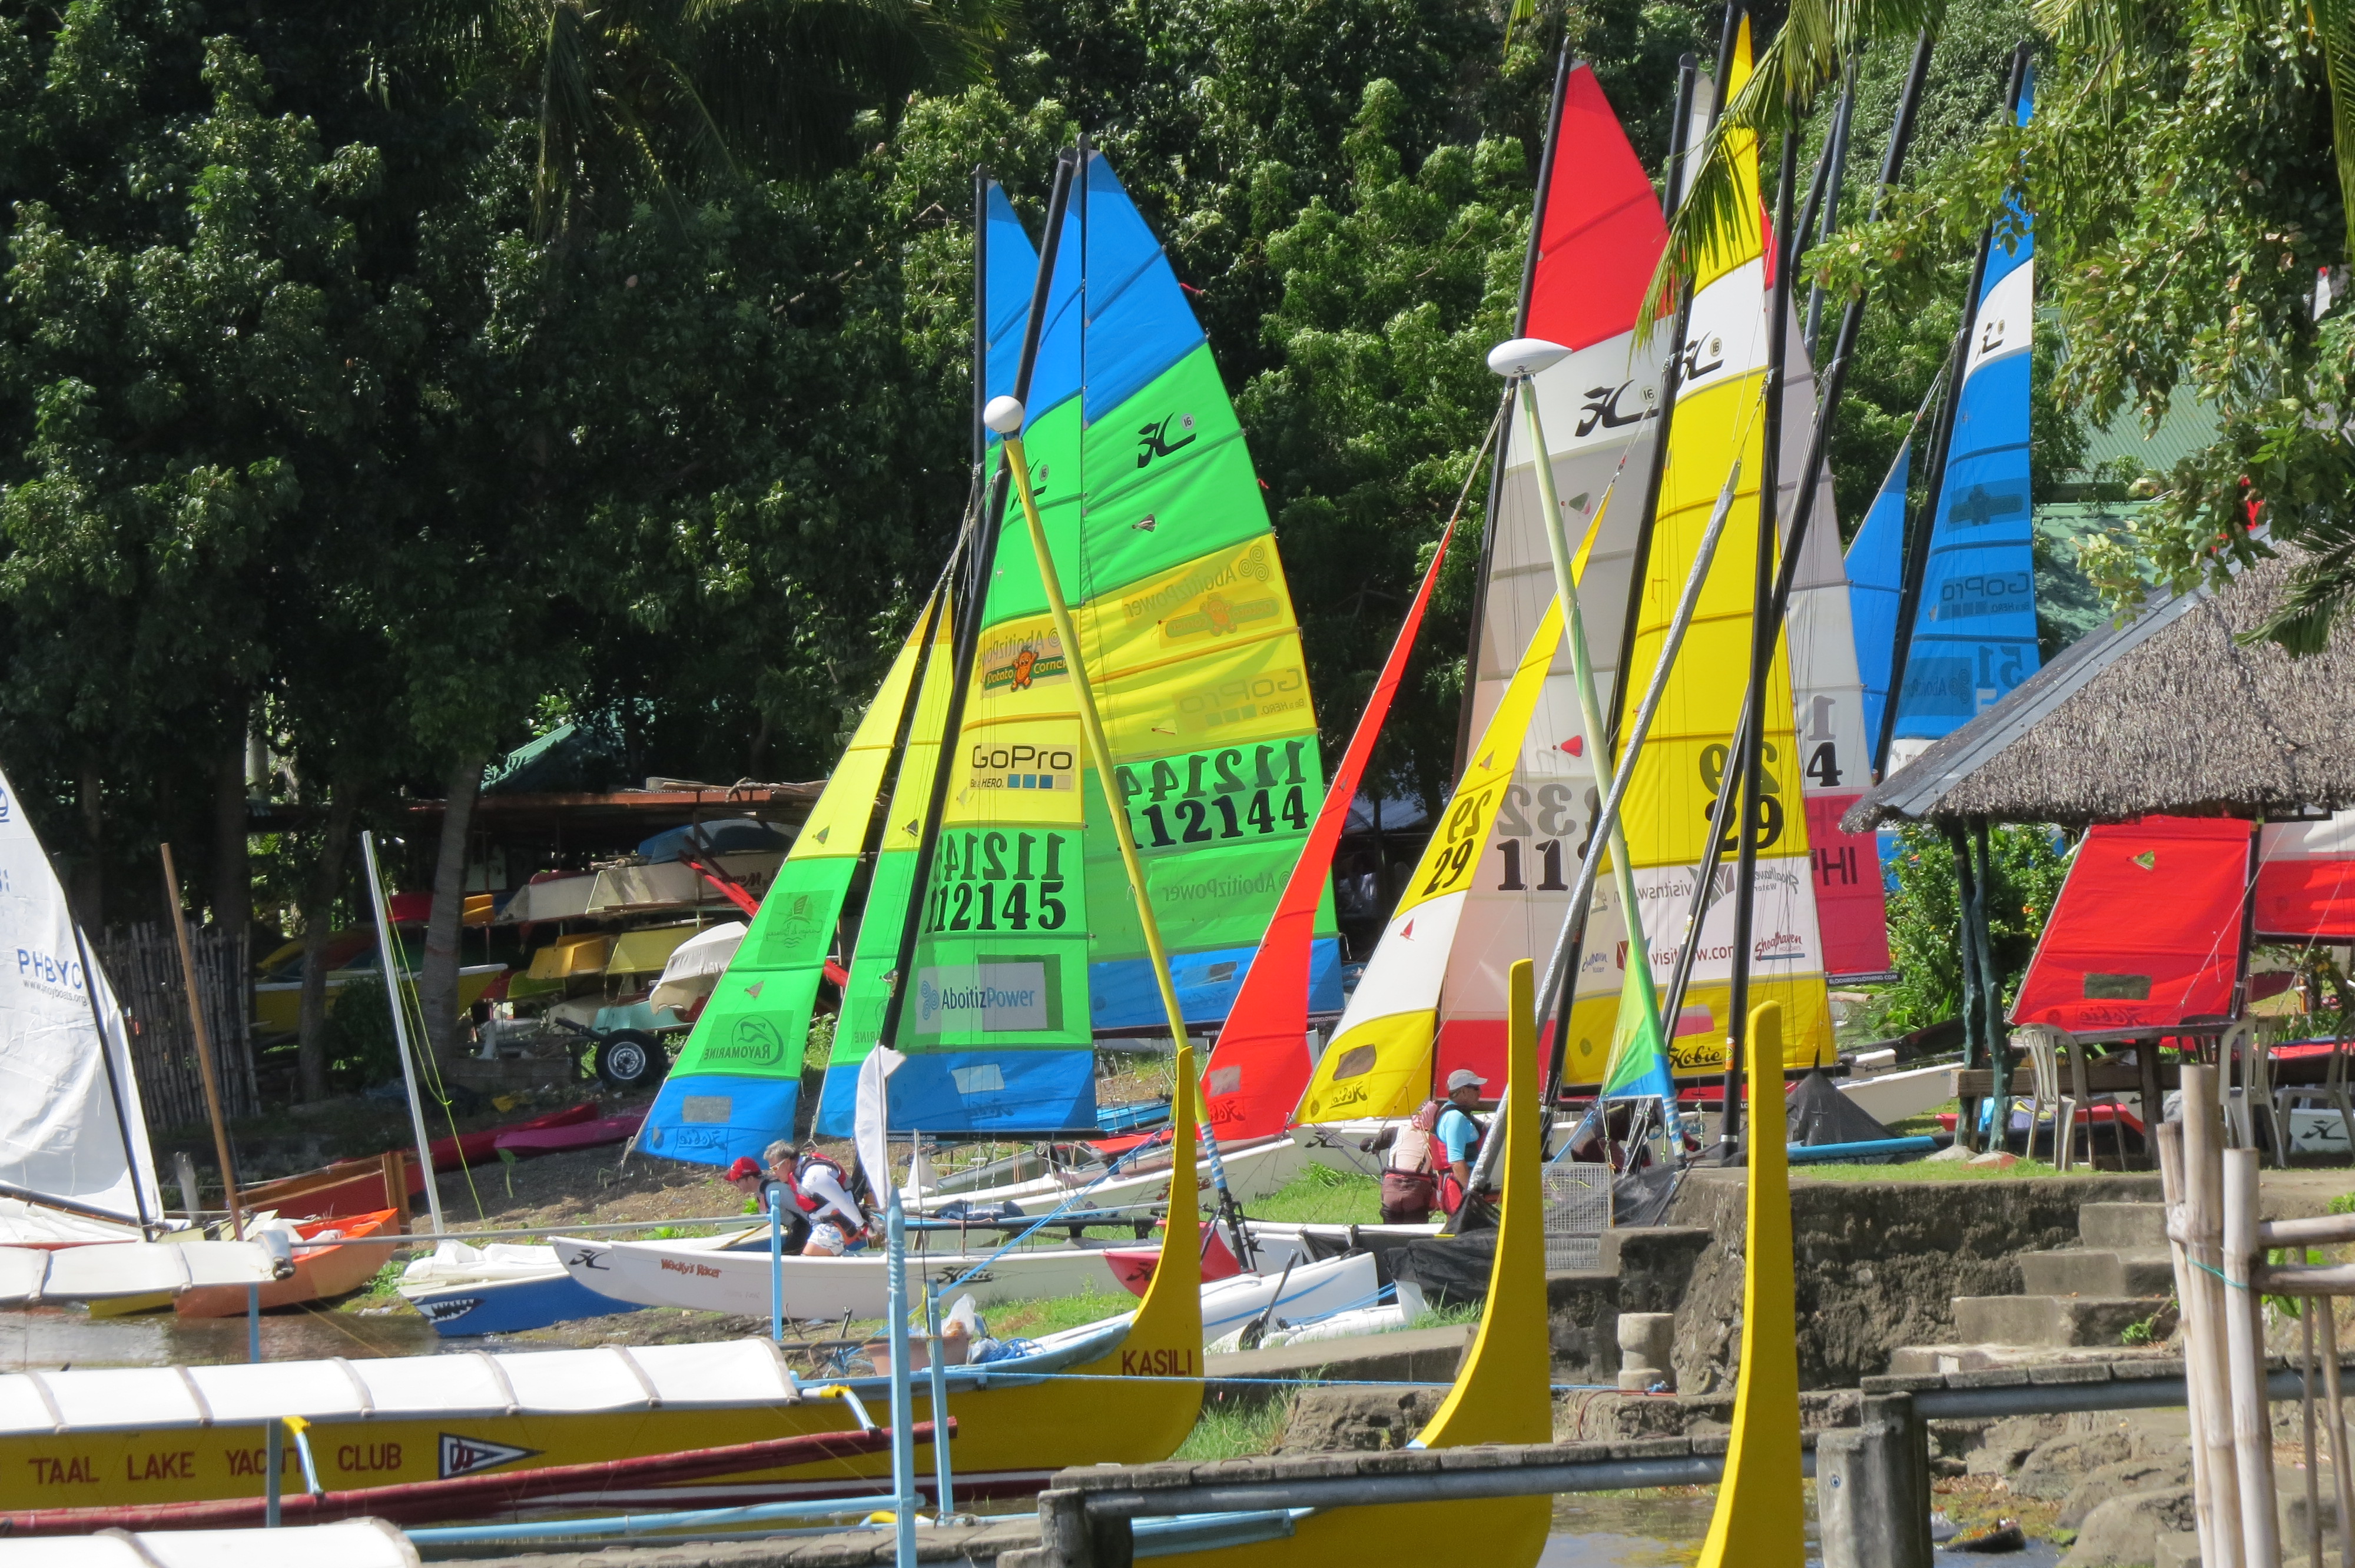 sail and sale